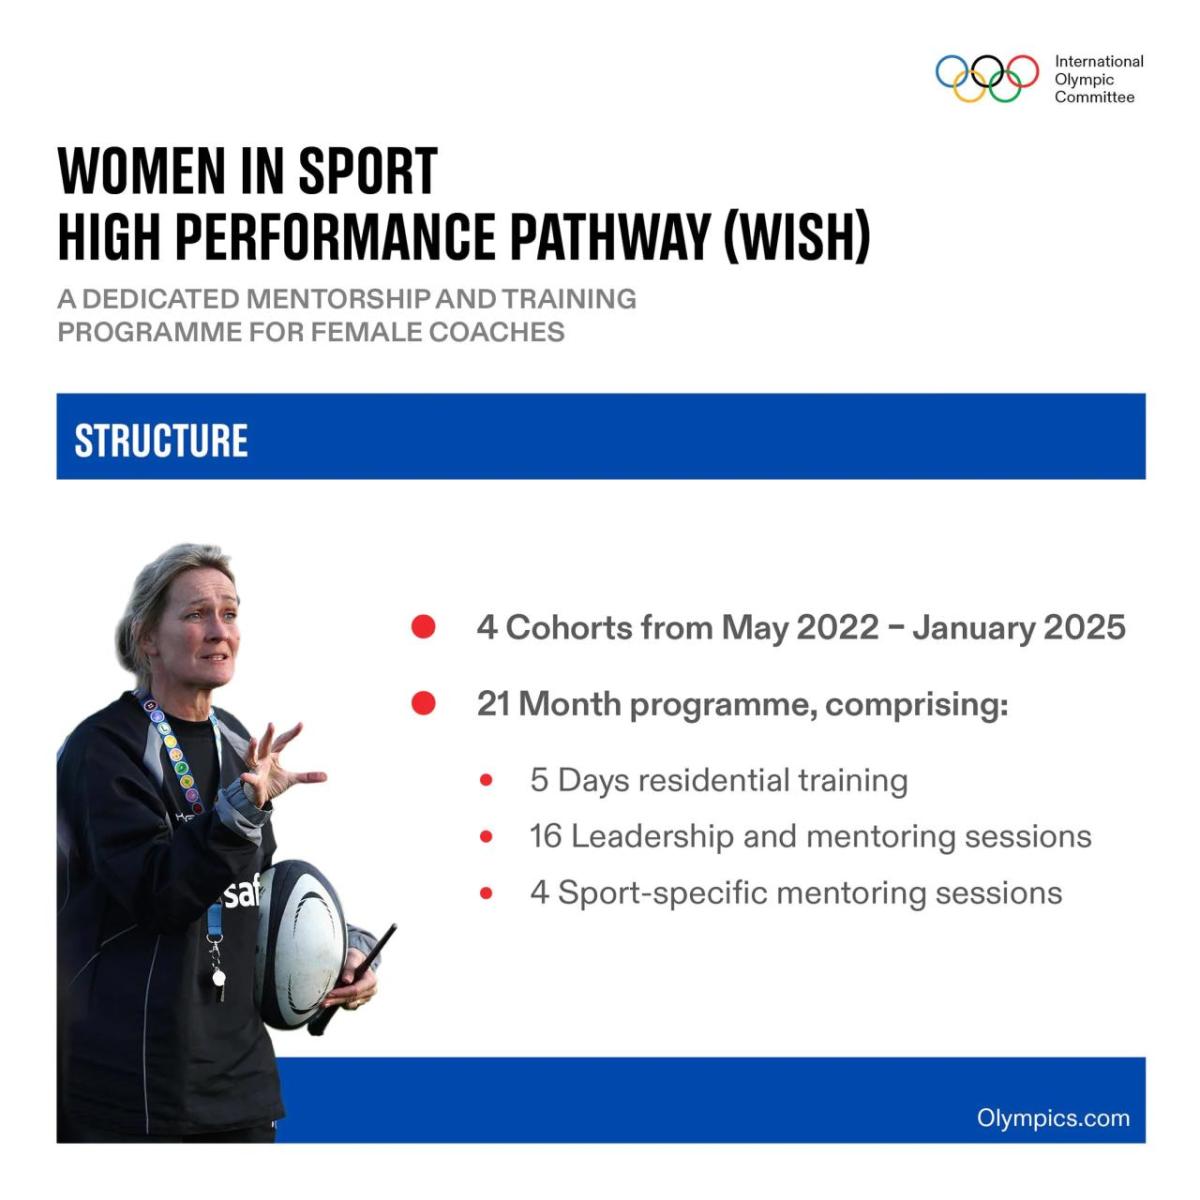 Info graphic: "Women in Sport High Performance Pathway (WISH) structure of 4 cohorts and 21-month programme details."